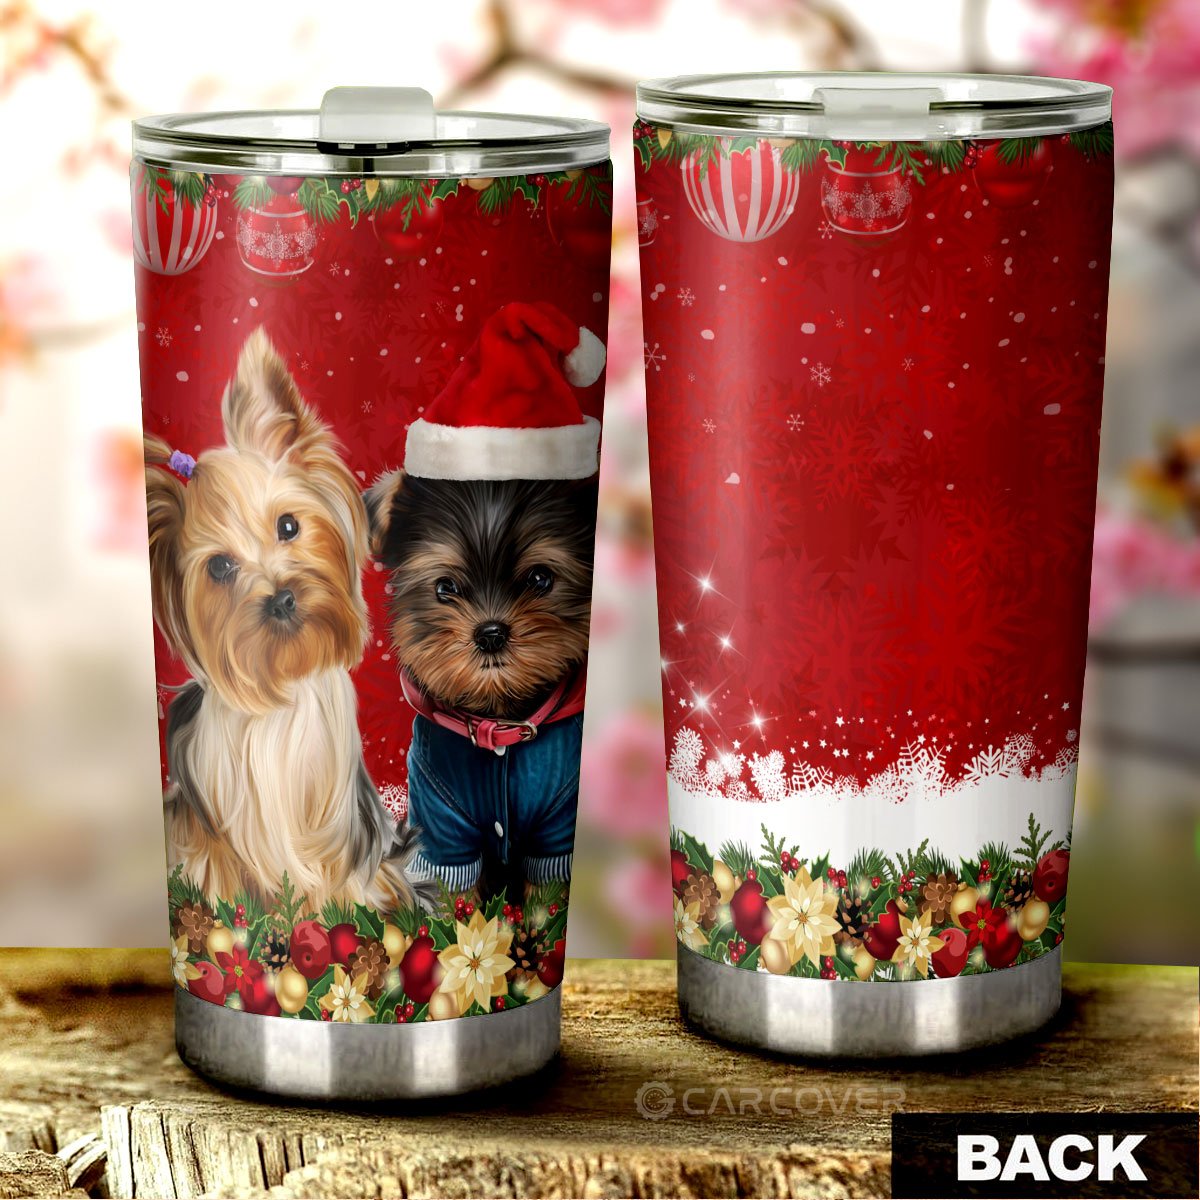 Yorkshire Terriers Dog Tumbler Cup Custom Christmas Car Interior Accessories - Gearcarcover - 4